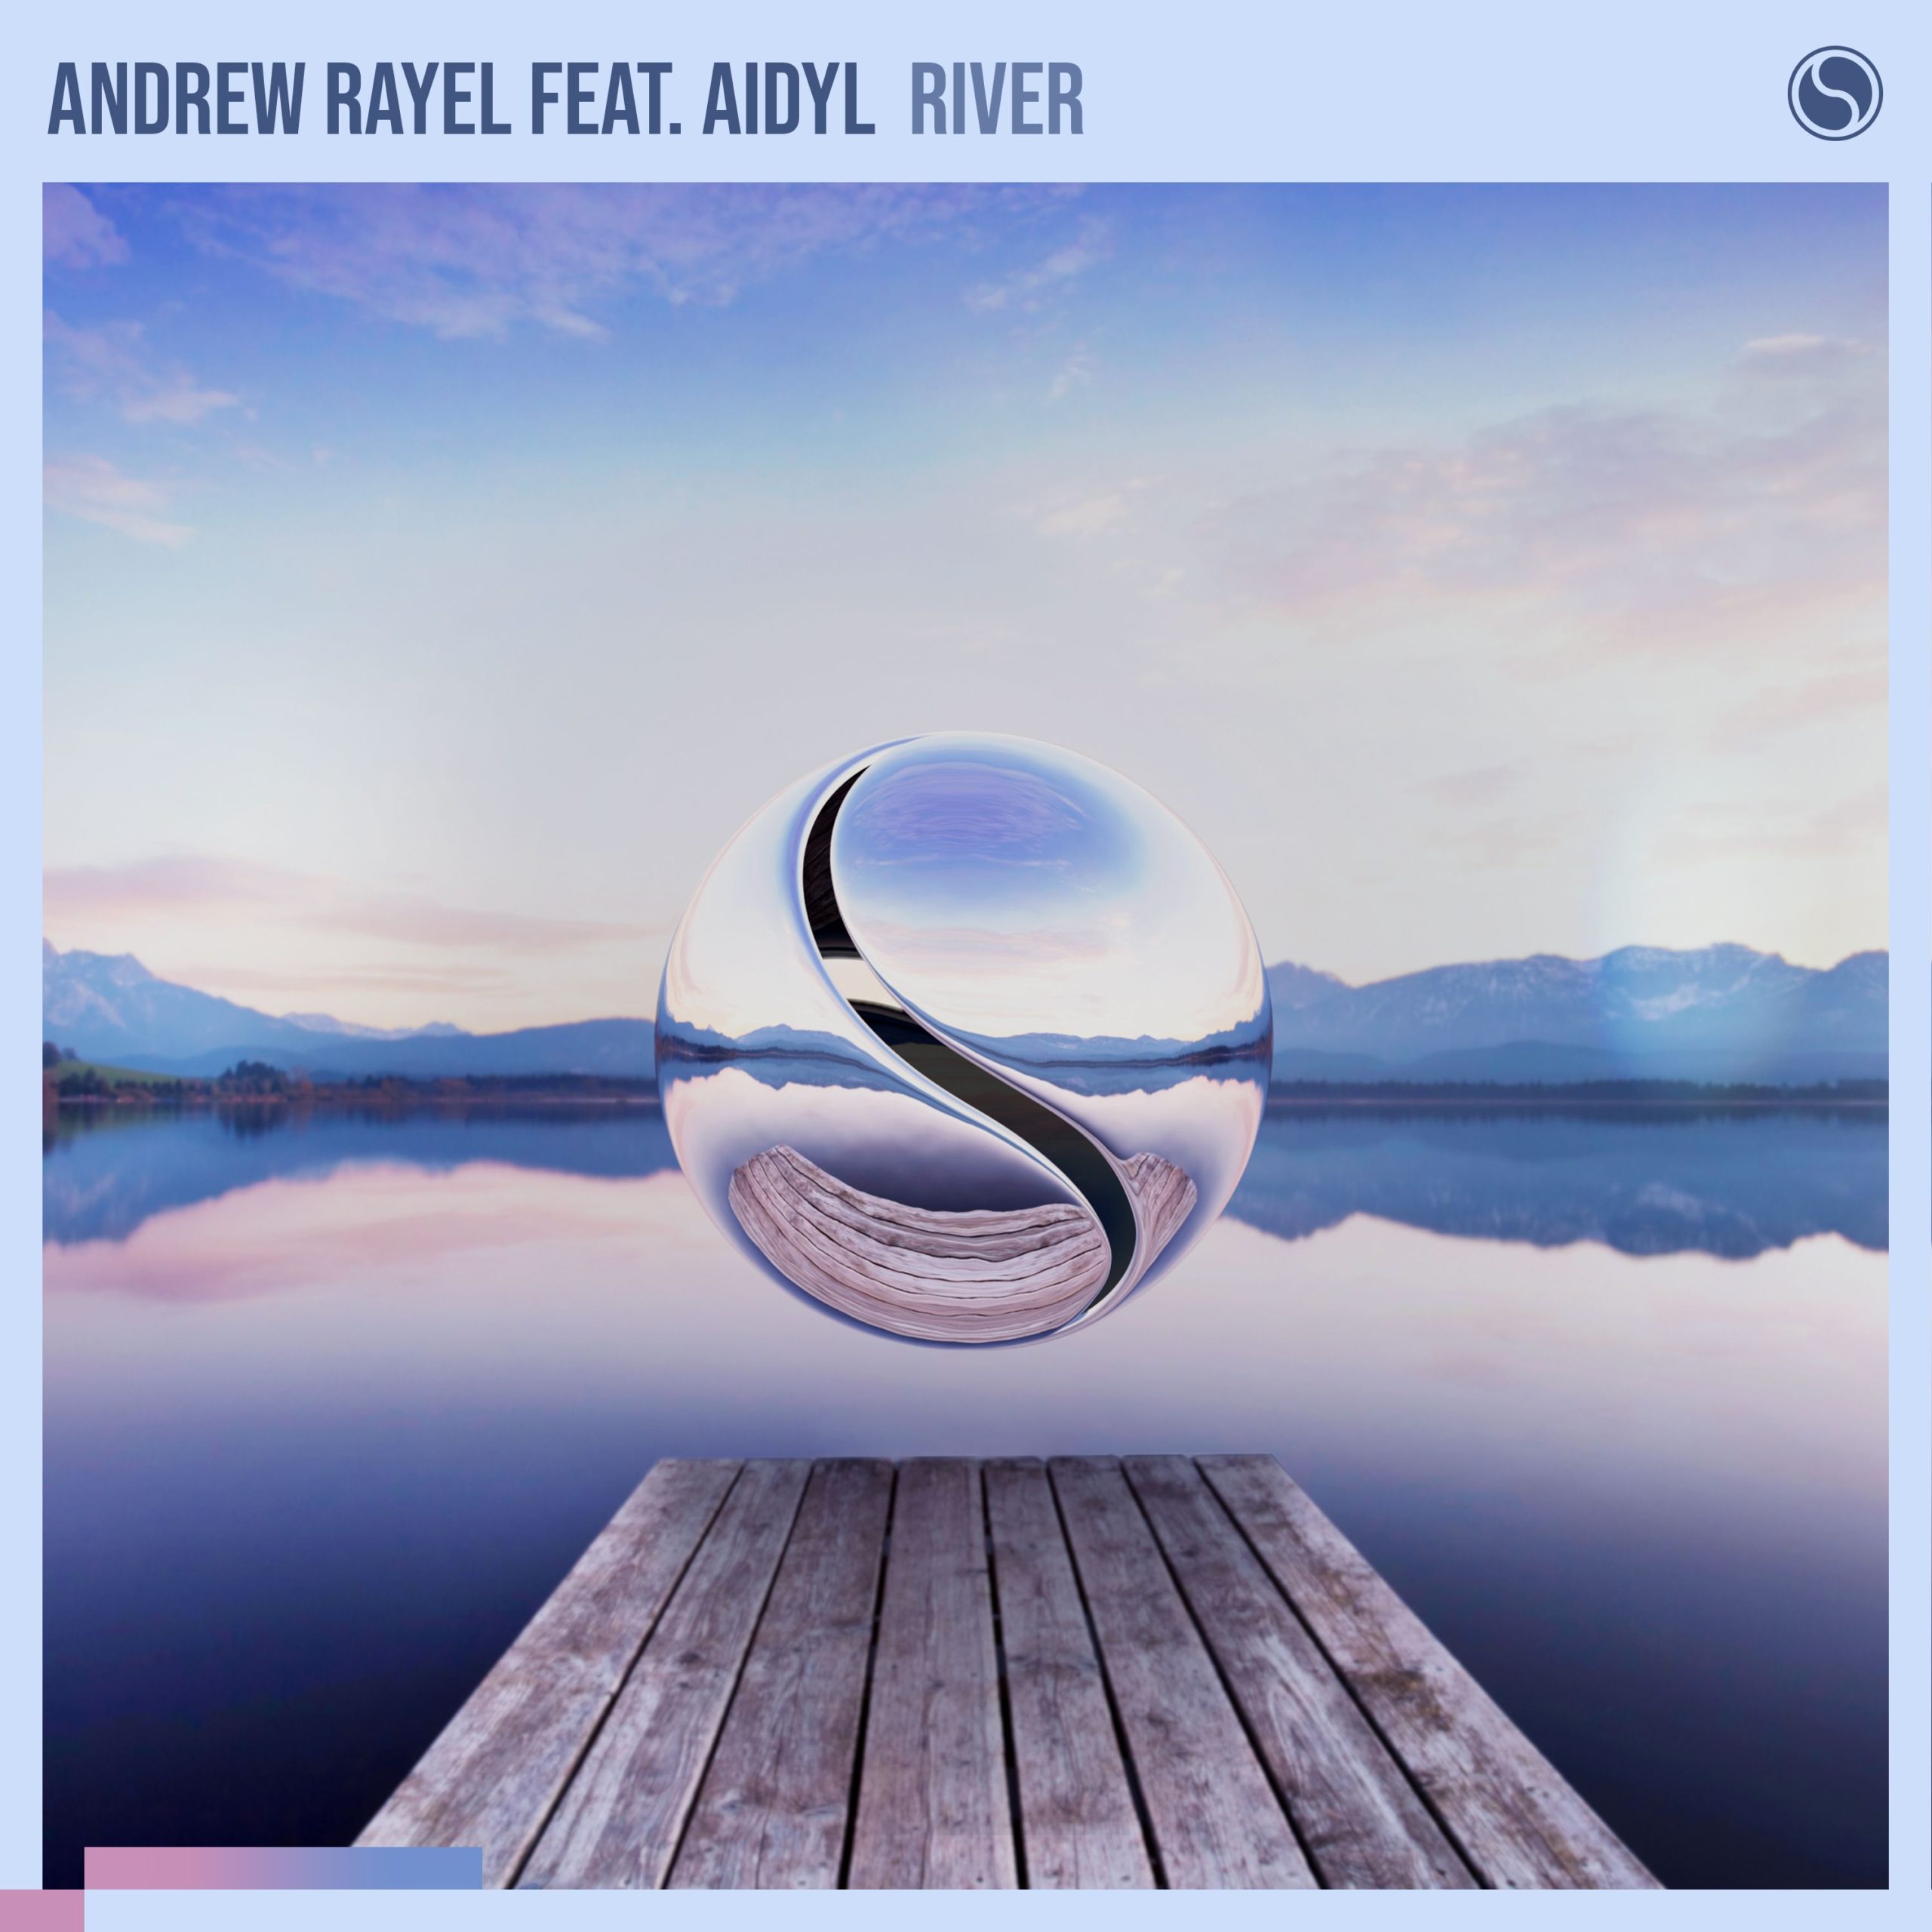 Andrew Rayel feat. AIDYL presents River on Armada Music